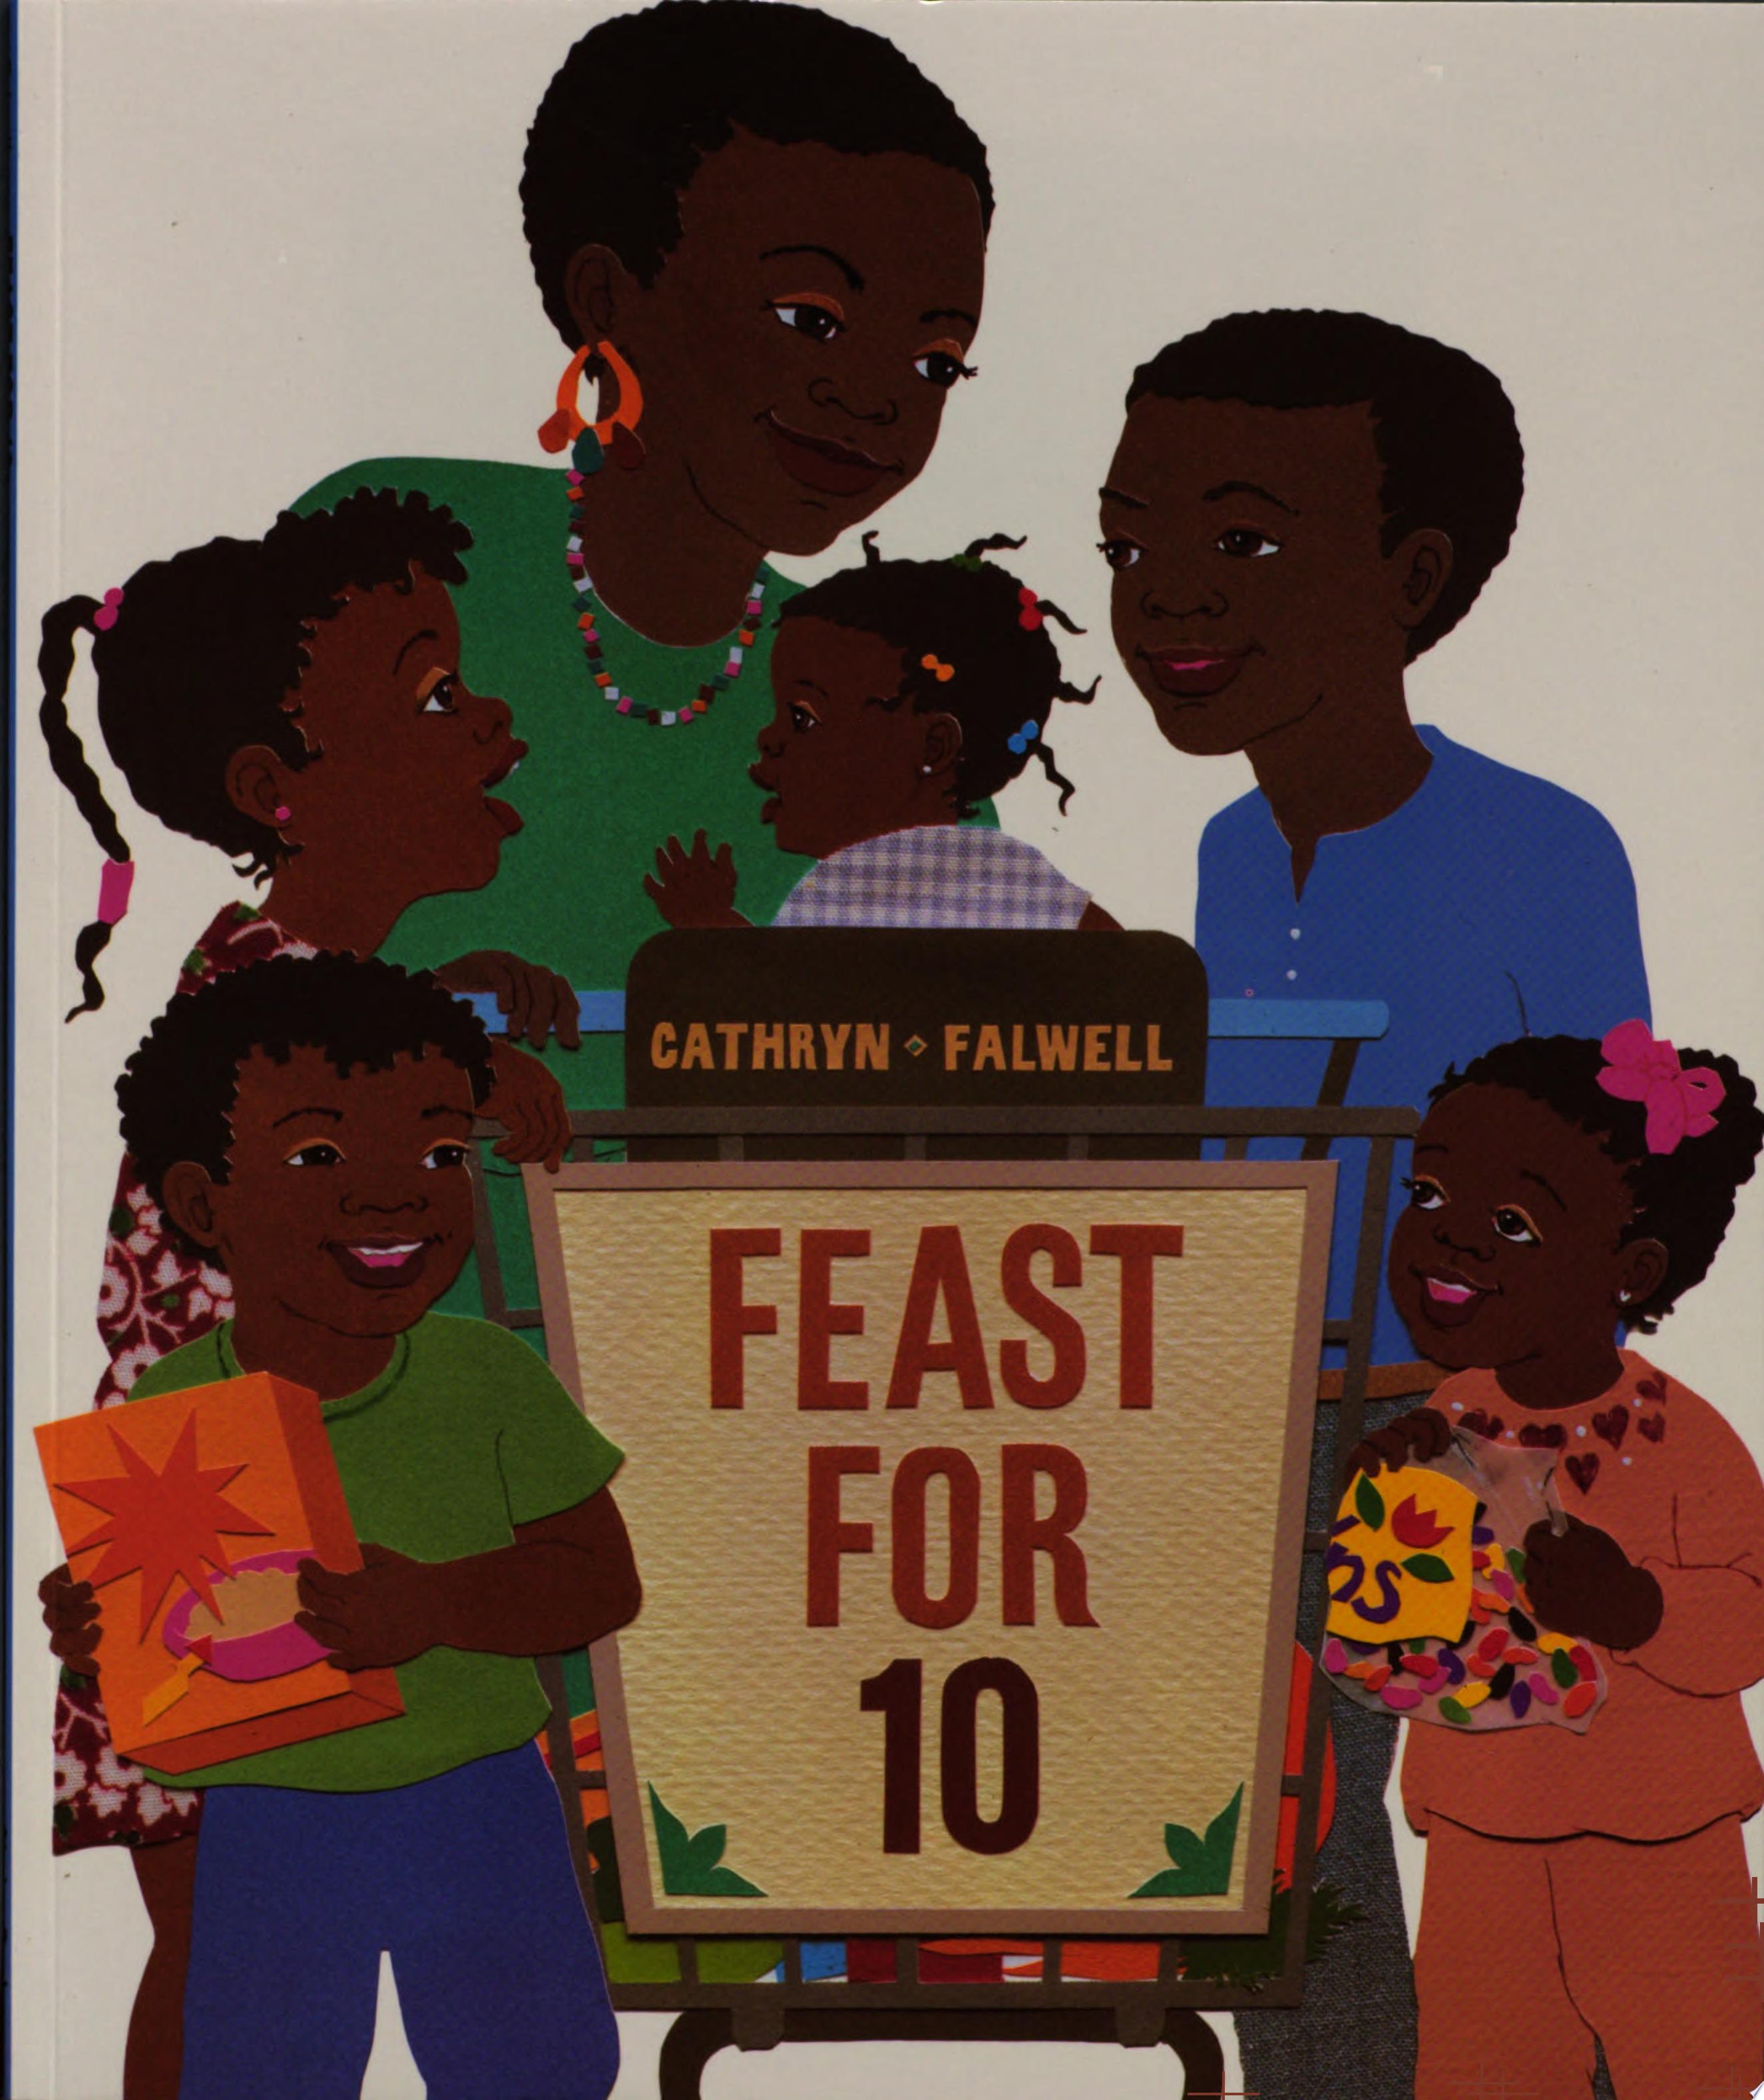 Image for "Feast for 10"